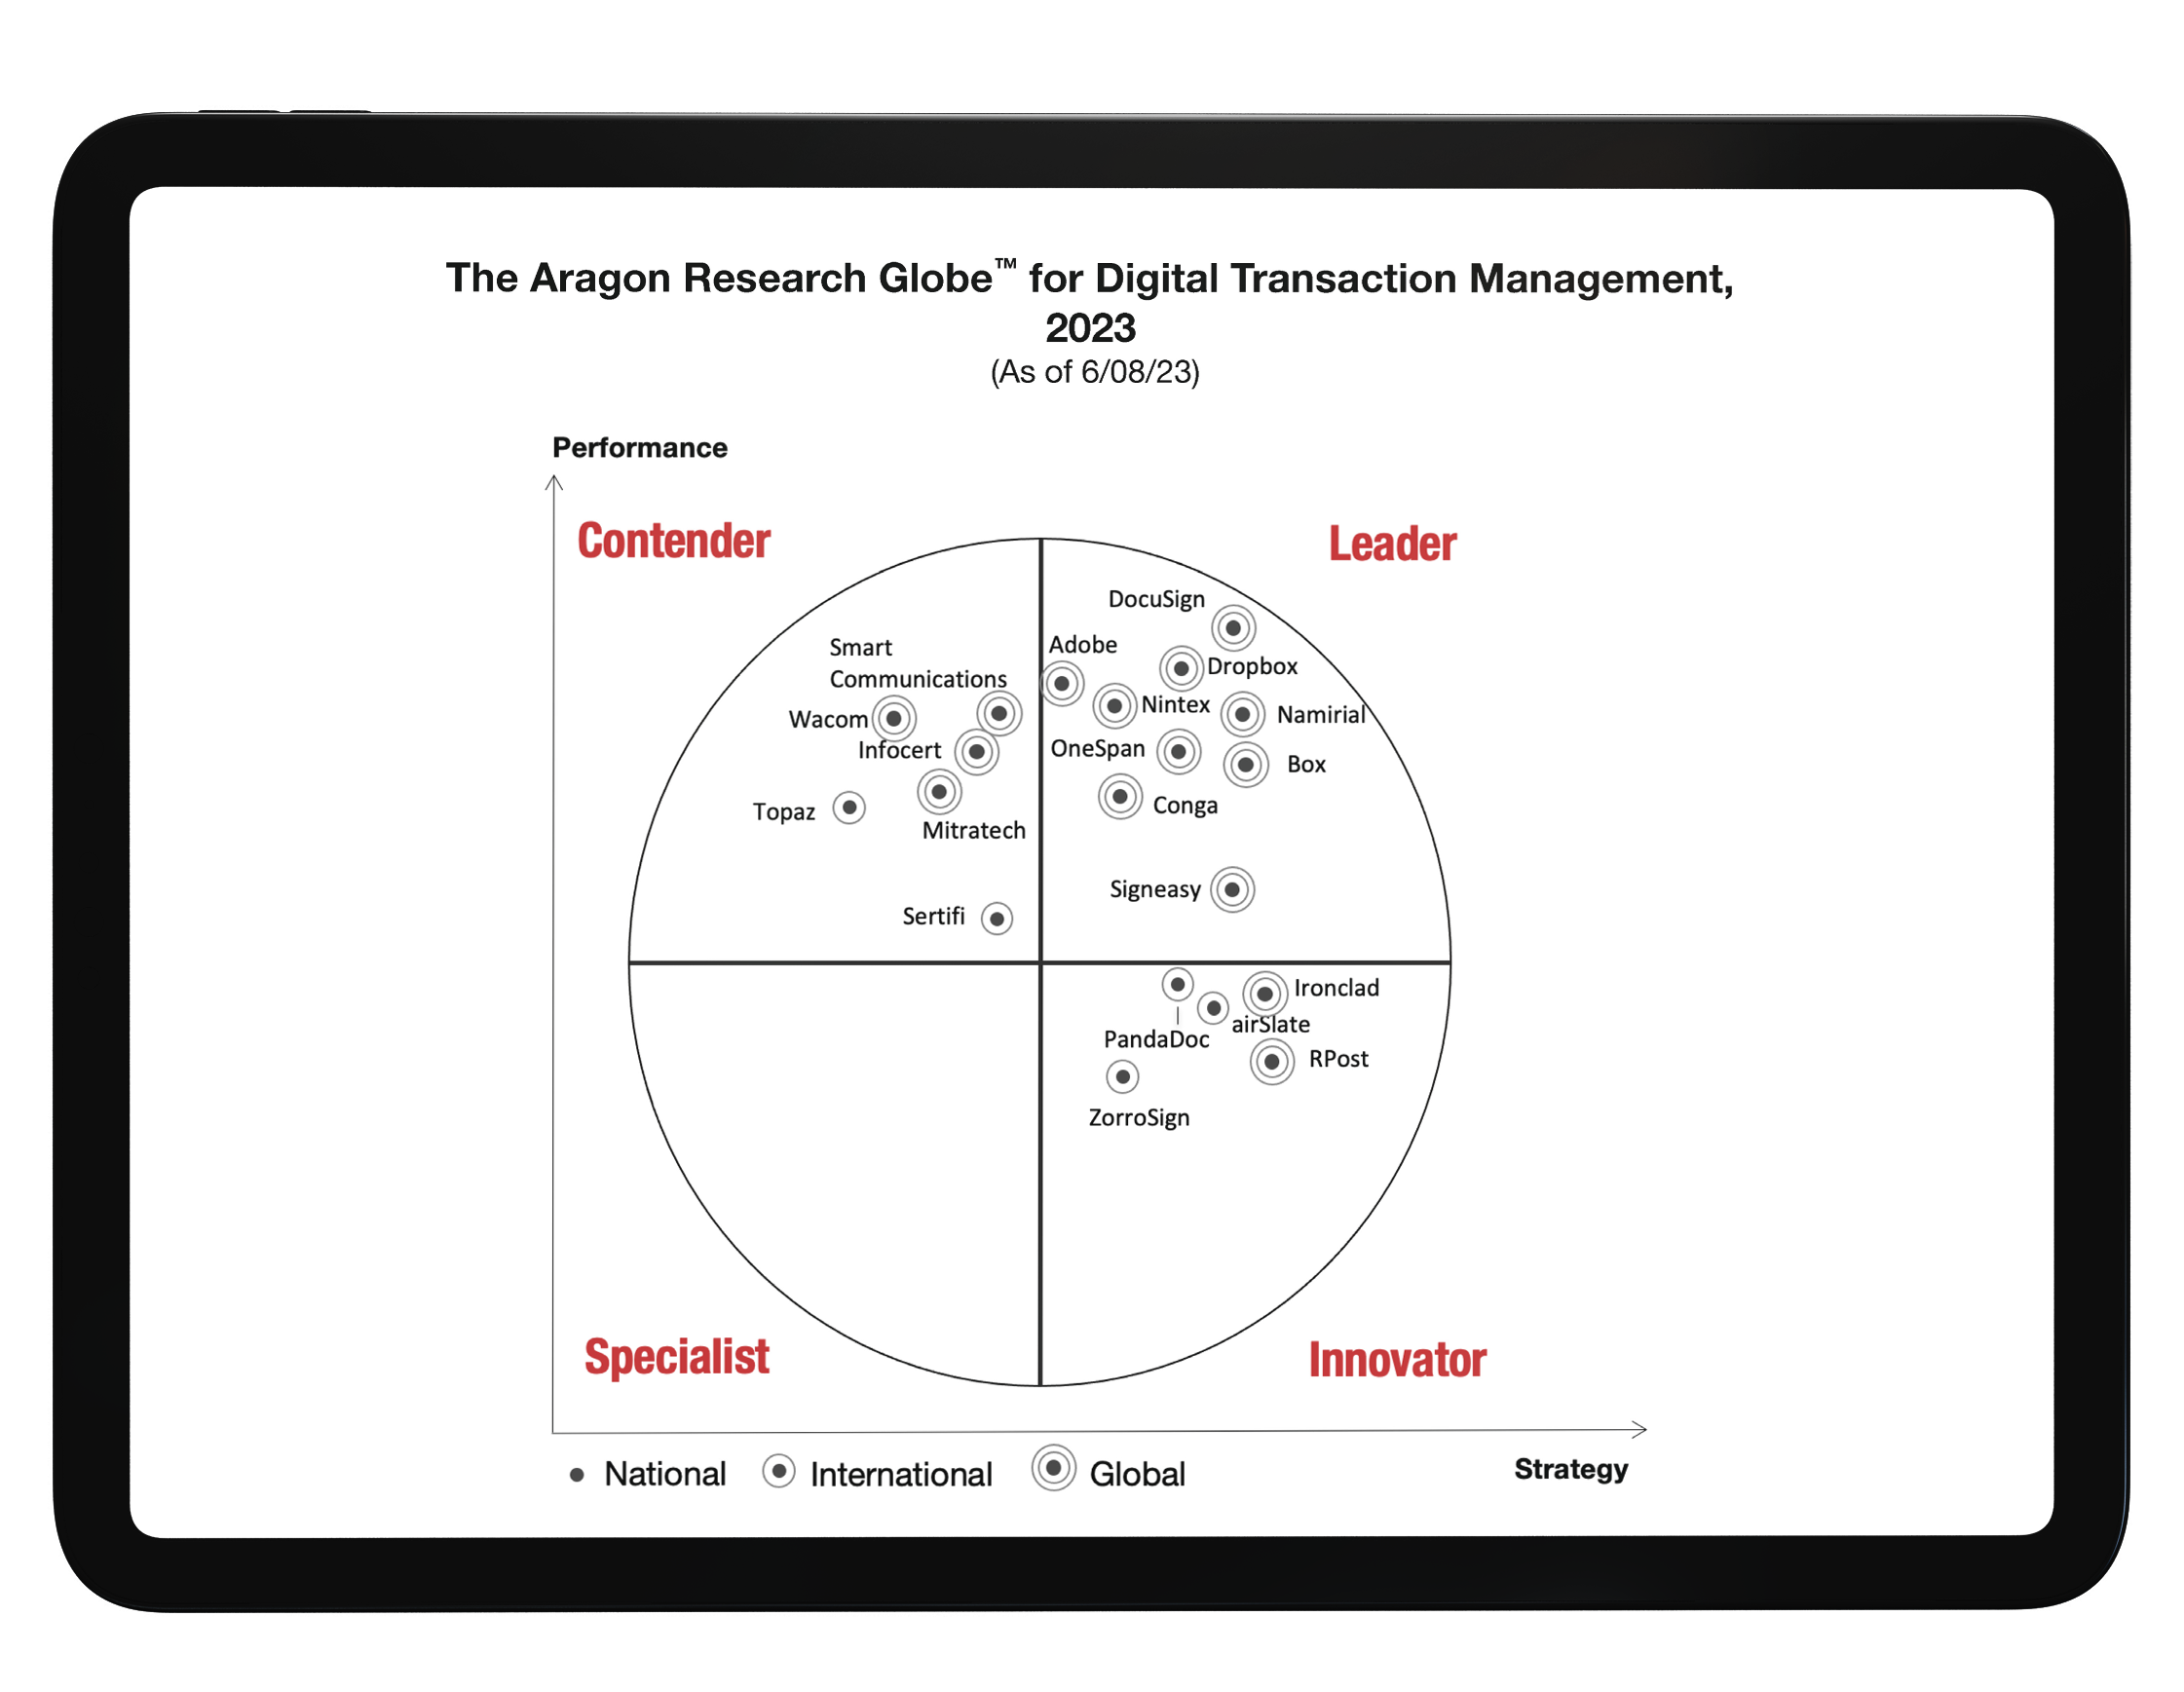 OneSpan a Leader in Aragon Research Globe for Digital Transaction Management 